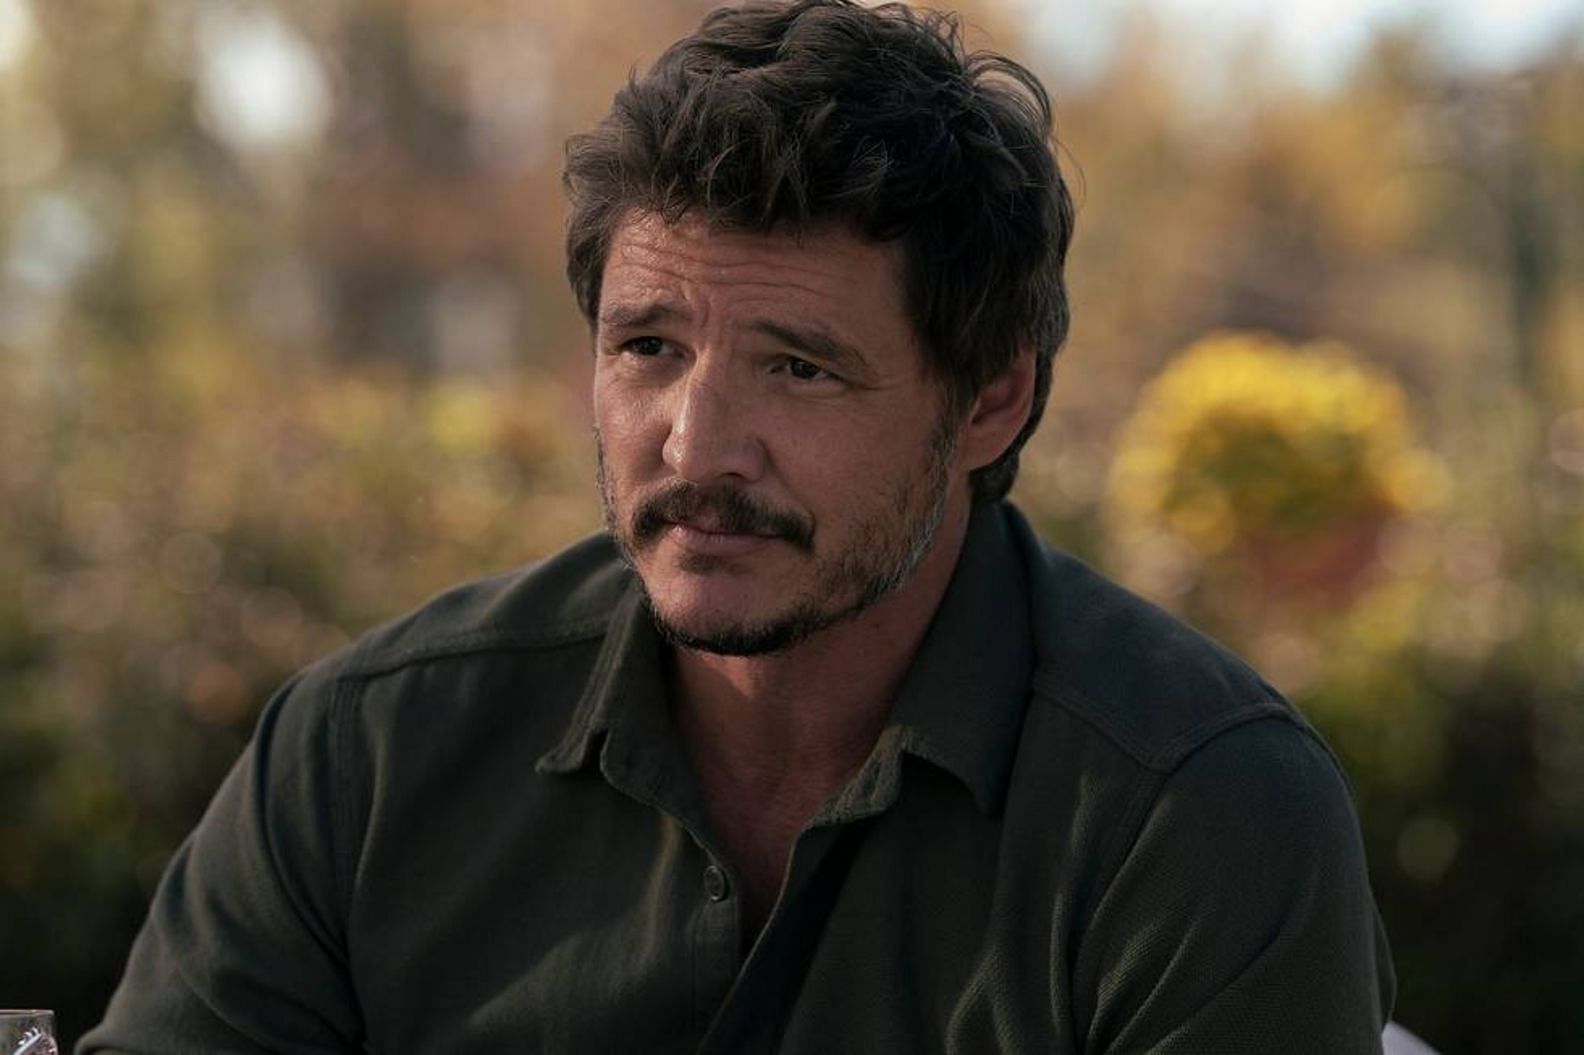 Pedro Pascal as Joel (Picture sourced from HBO Press Room)